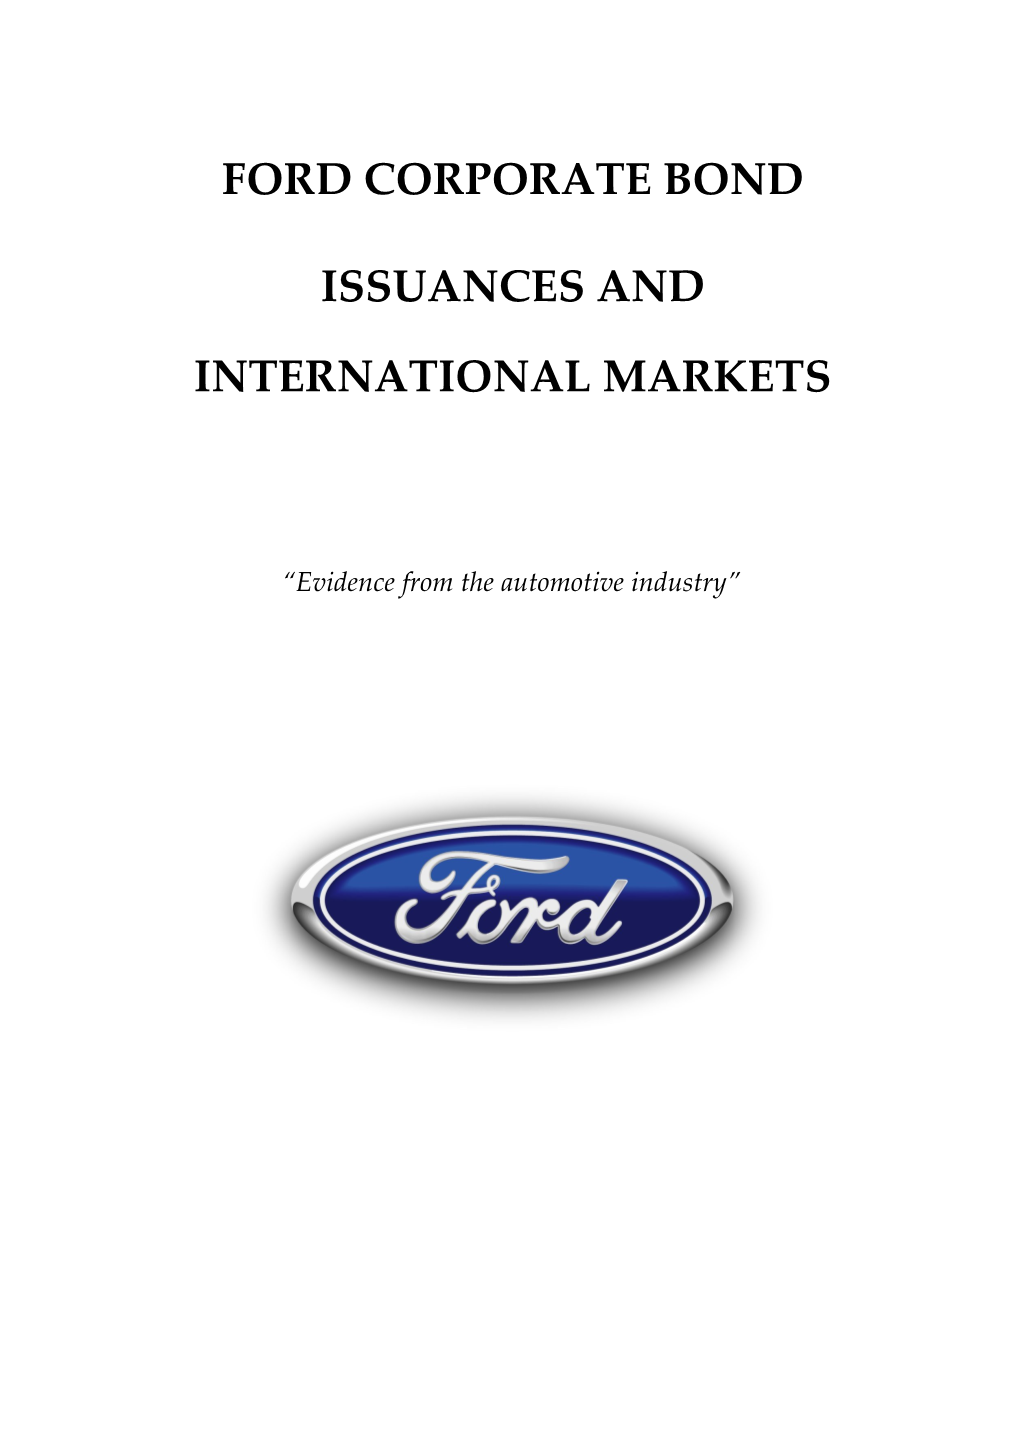 Ford Corporate Bond Issuances and International Capital Markets